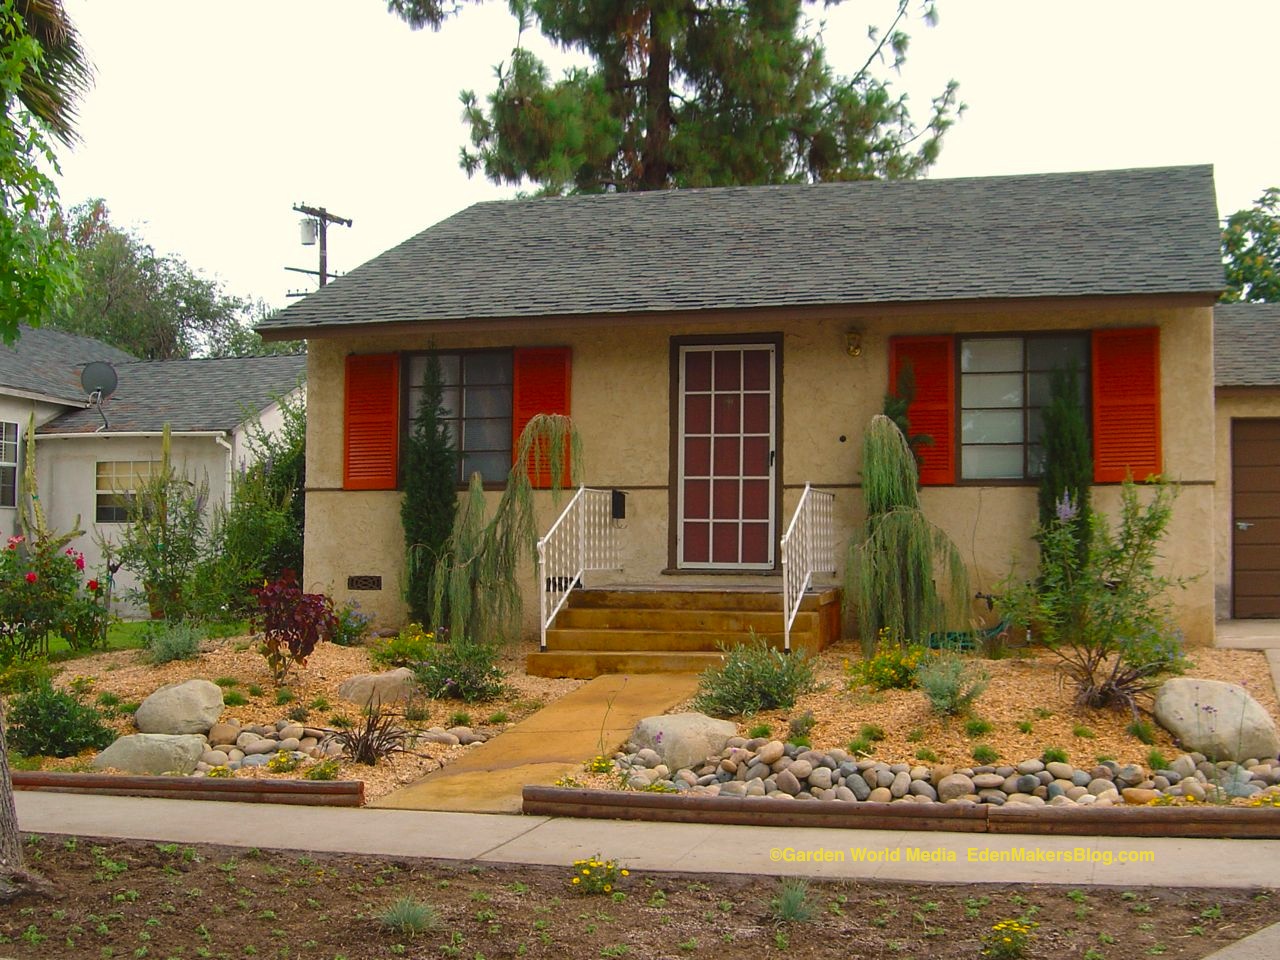 Access Here lot info: Pictures of landscaping xeriscape landscaping